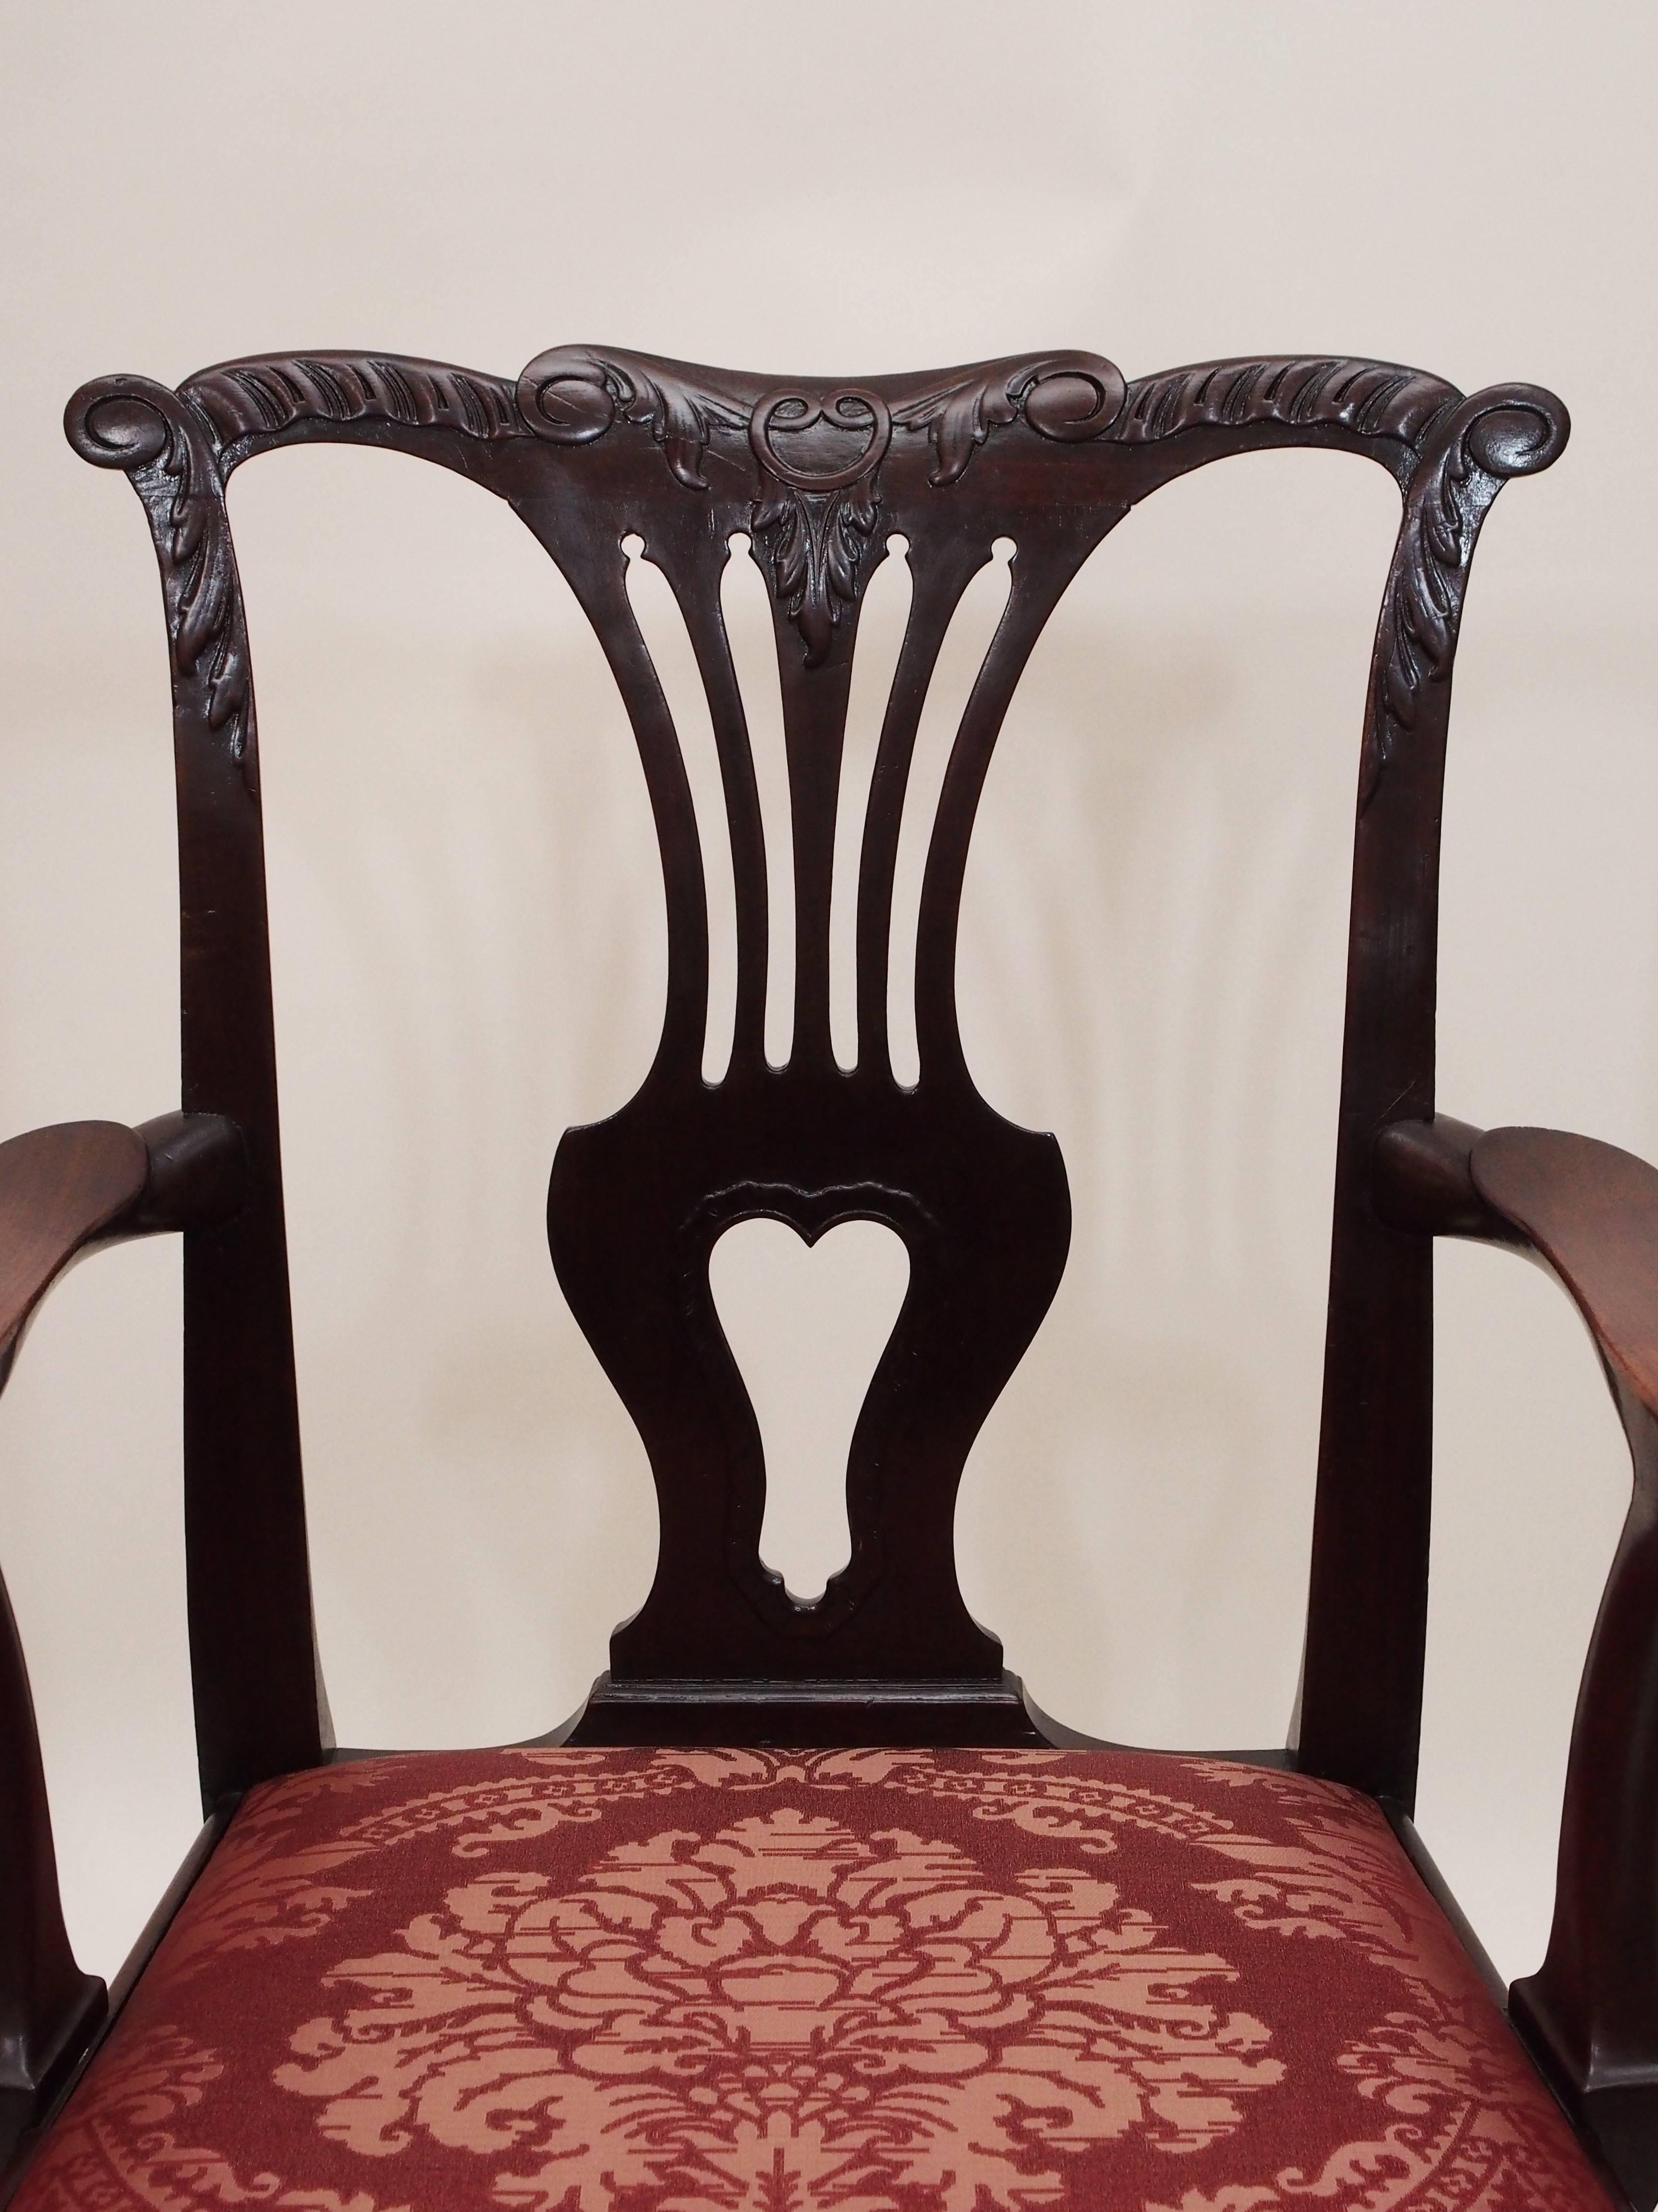 Set of 12 antique English mahogany 19th century dining chairs. The armchairs measure 39 inches high, 25 1/2 inches wide and 19 inches deep.